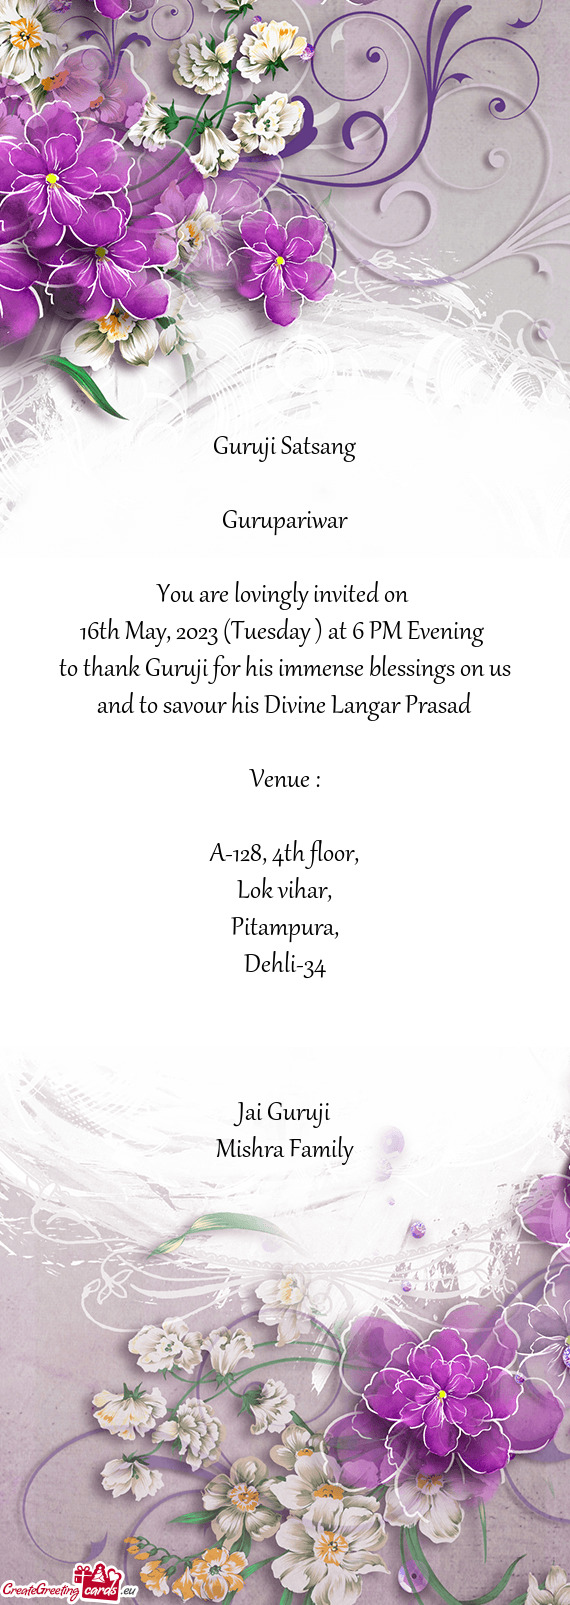 16th May, 2023 (Tuesday ) at 6 PM Evening